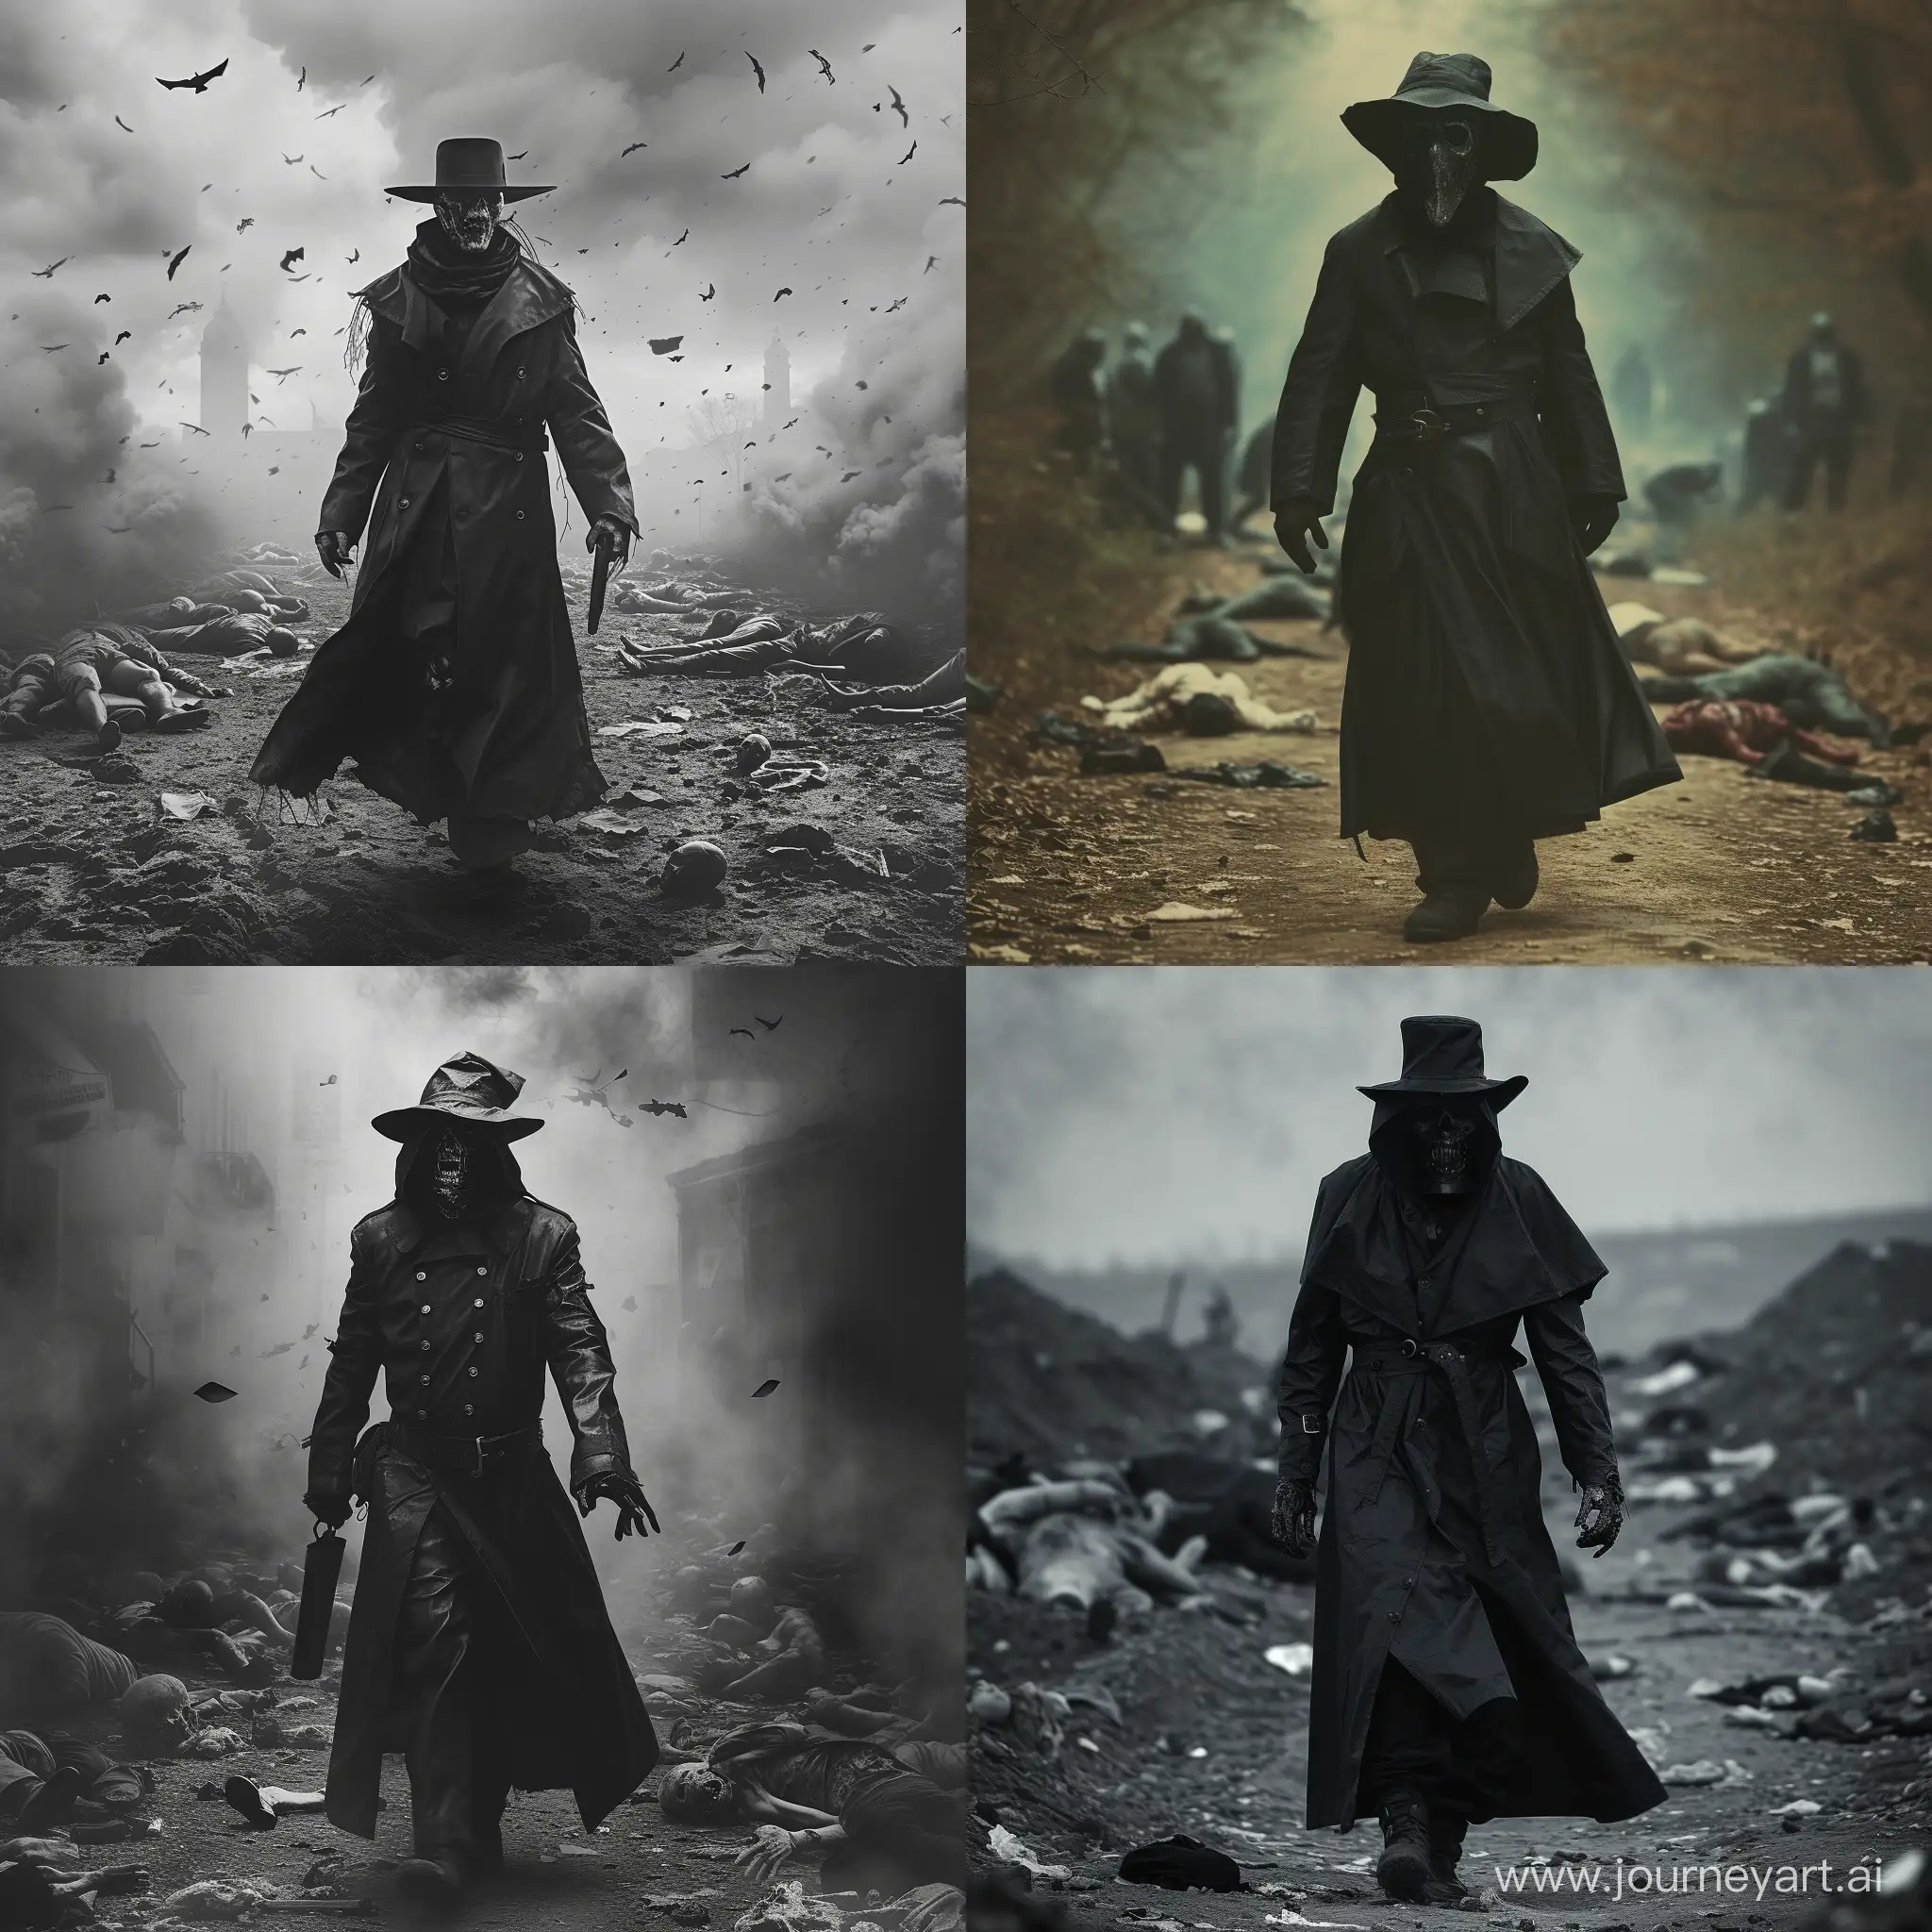 Plague-Doctor-Zombie-Walking-Amongst-Scattered-Bodies